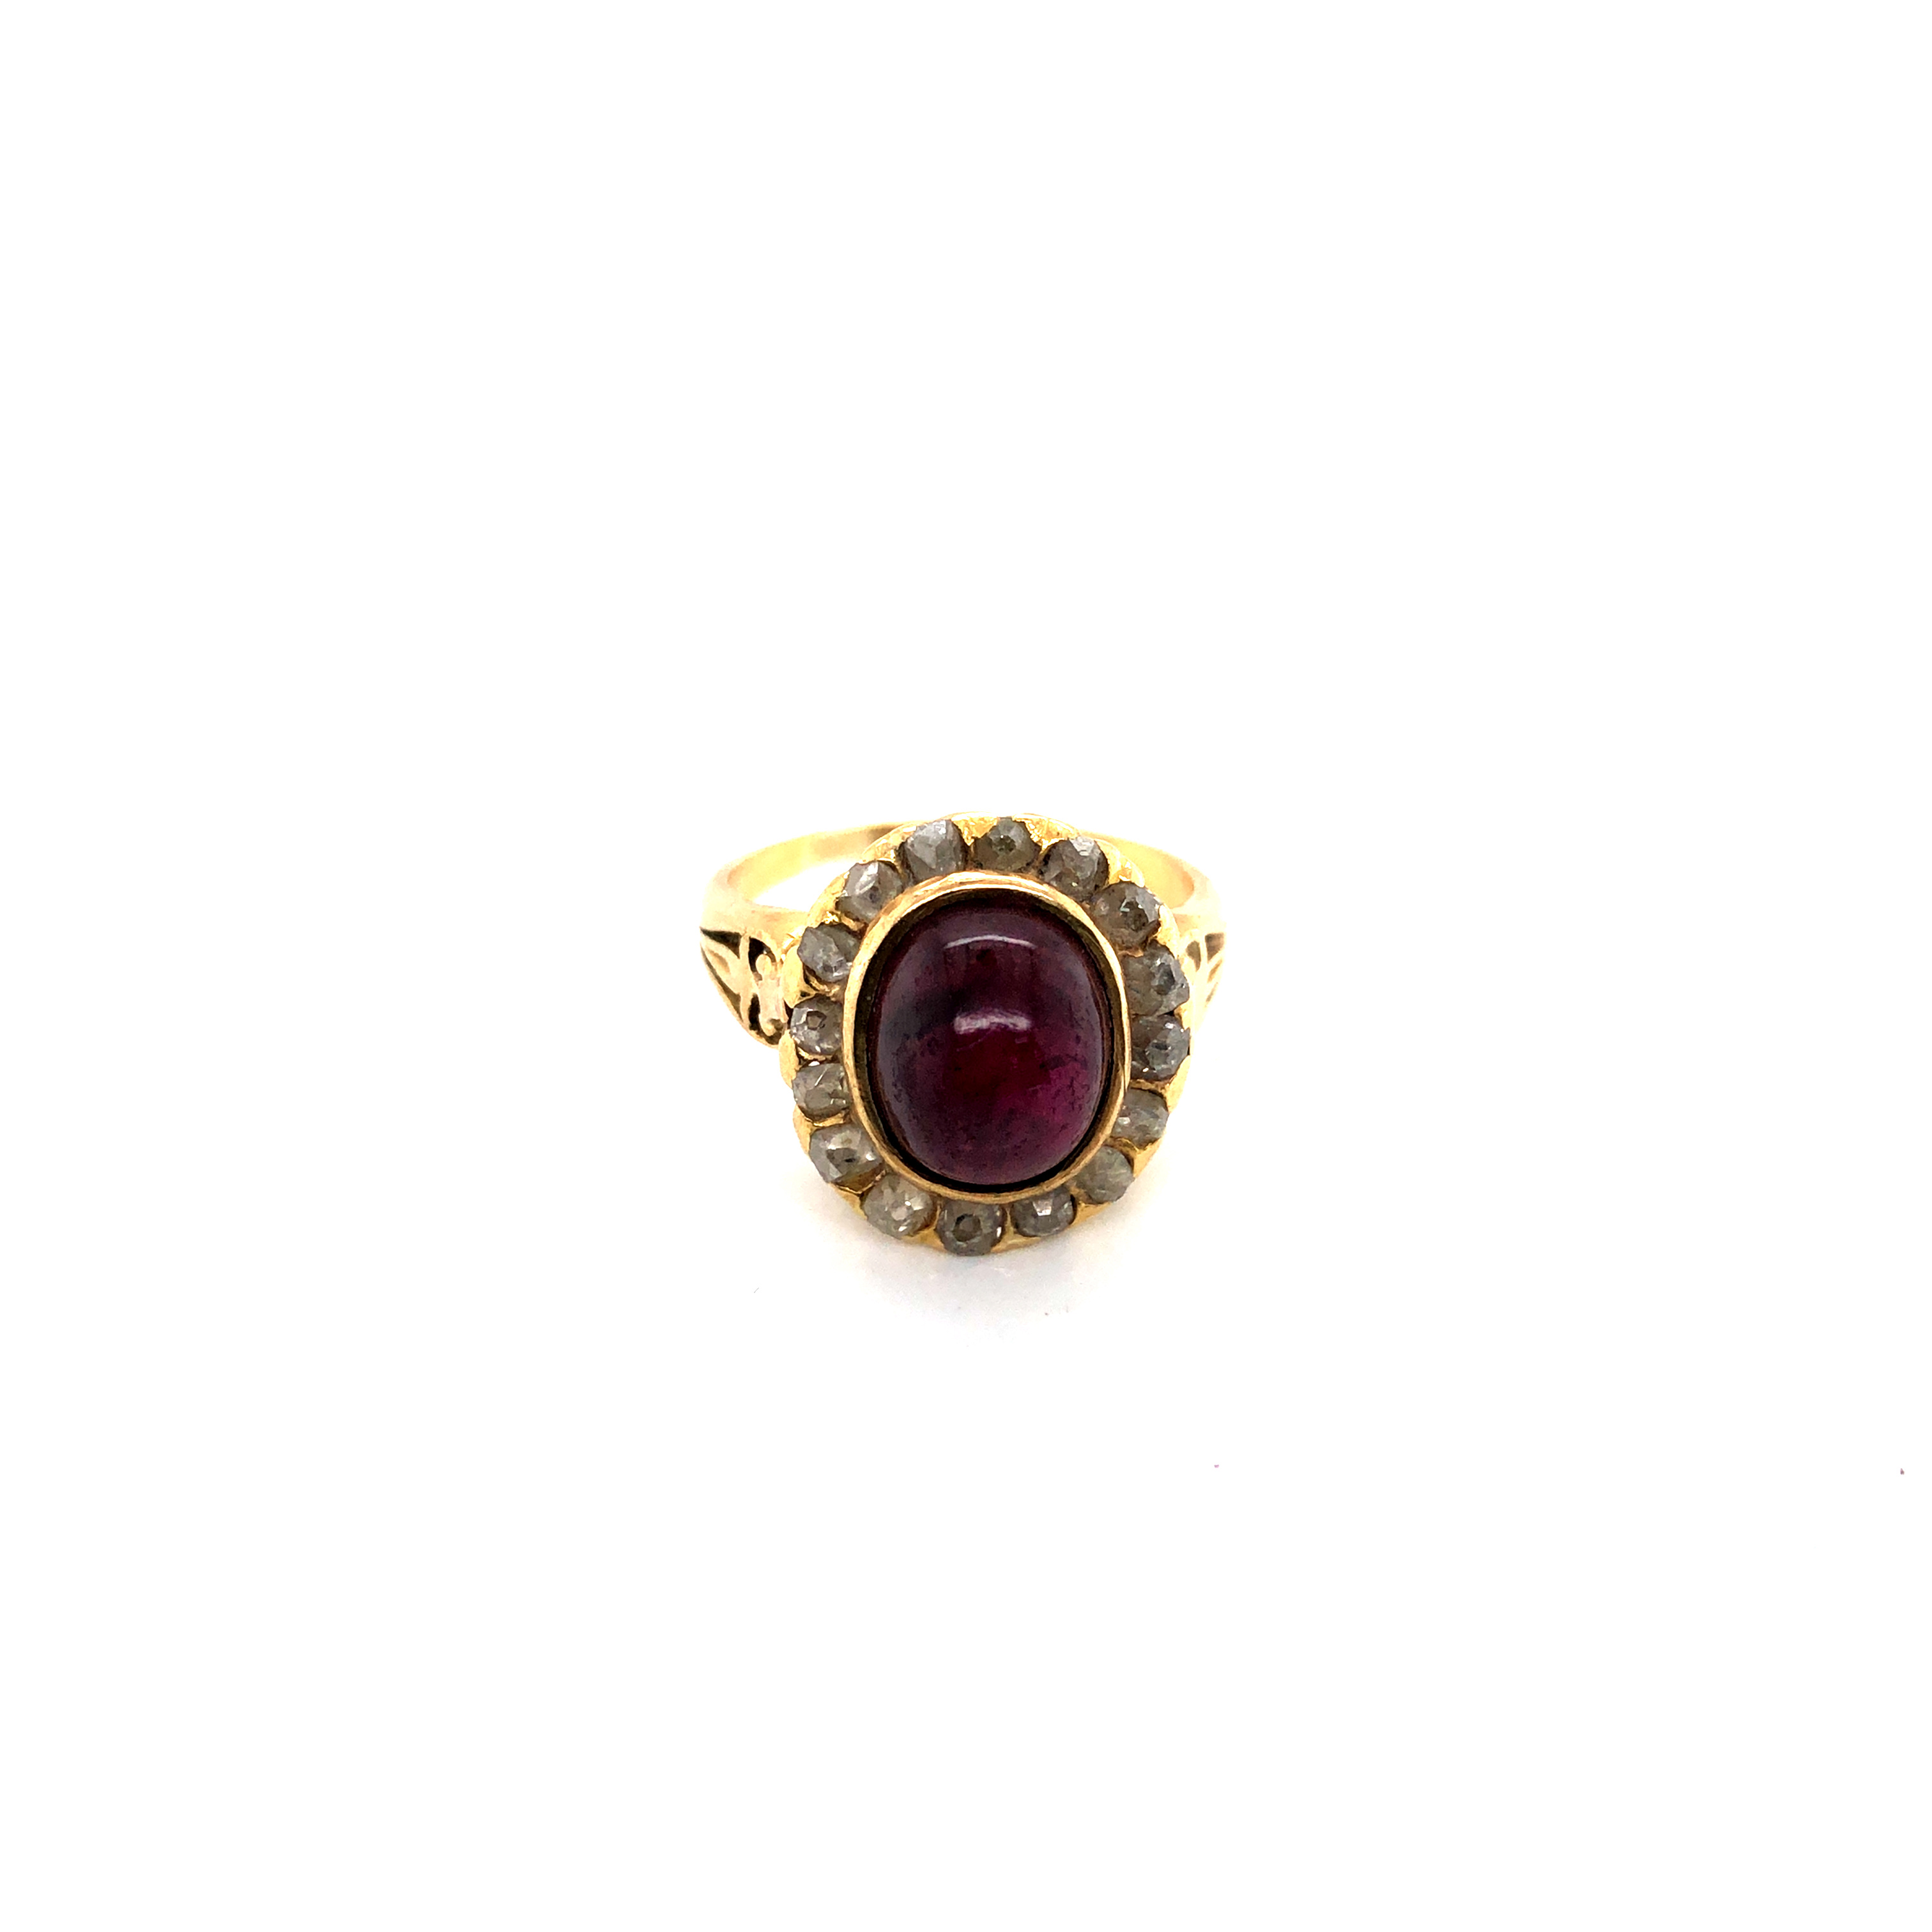 AN ANTIQUE GARNET AND DIAMOND CLUSTER RING. THE CENTRAL OVAL CABOCHON, SURROUNDED BY A CLUSTER OF